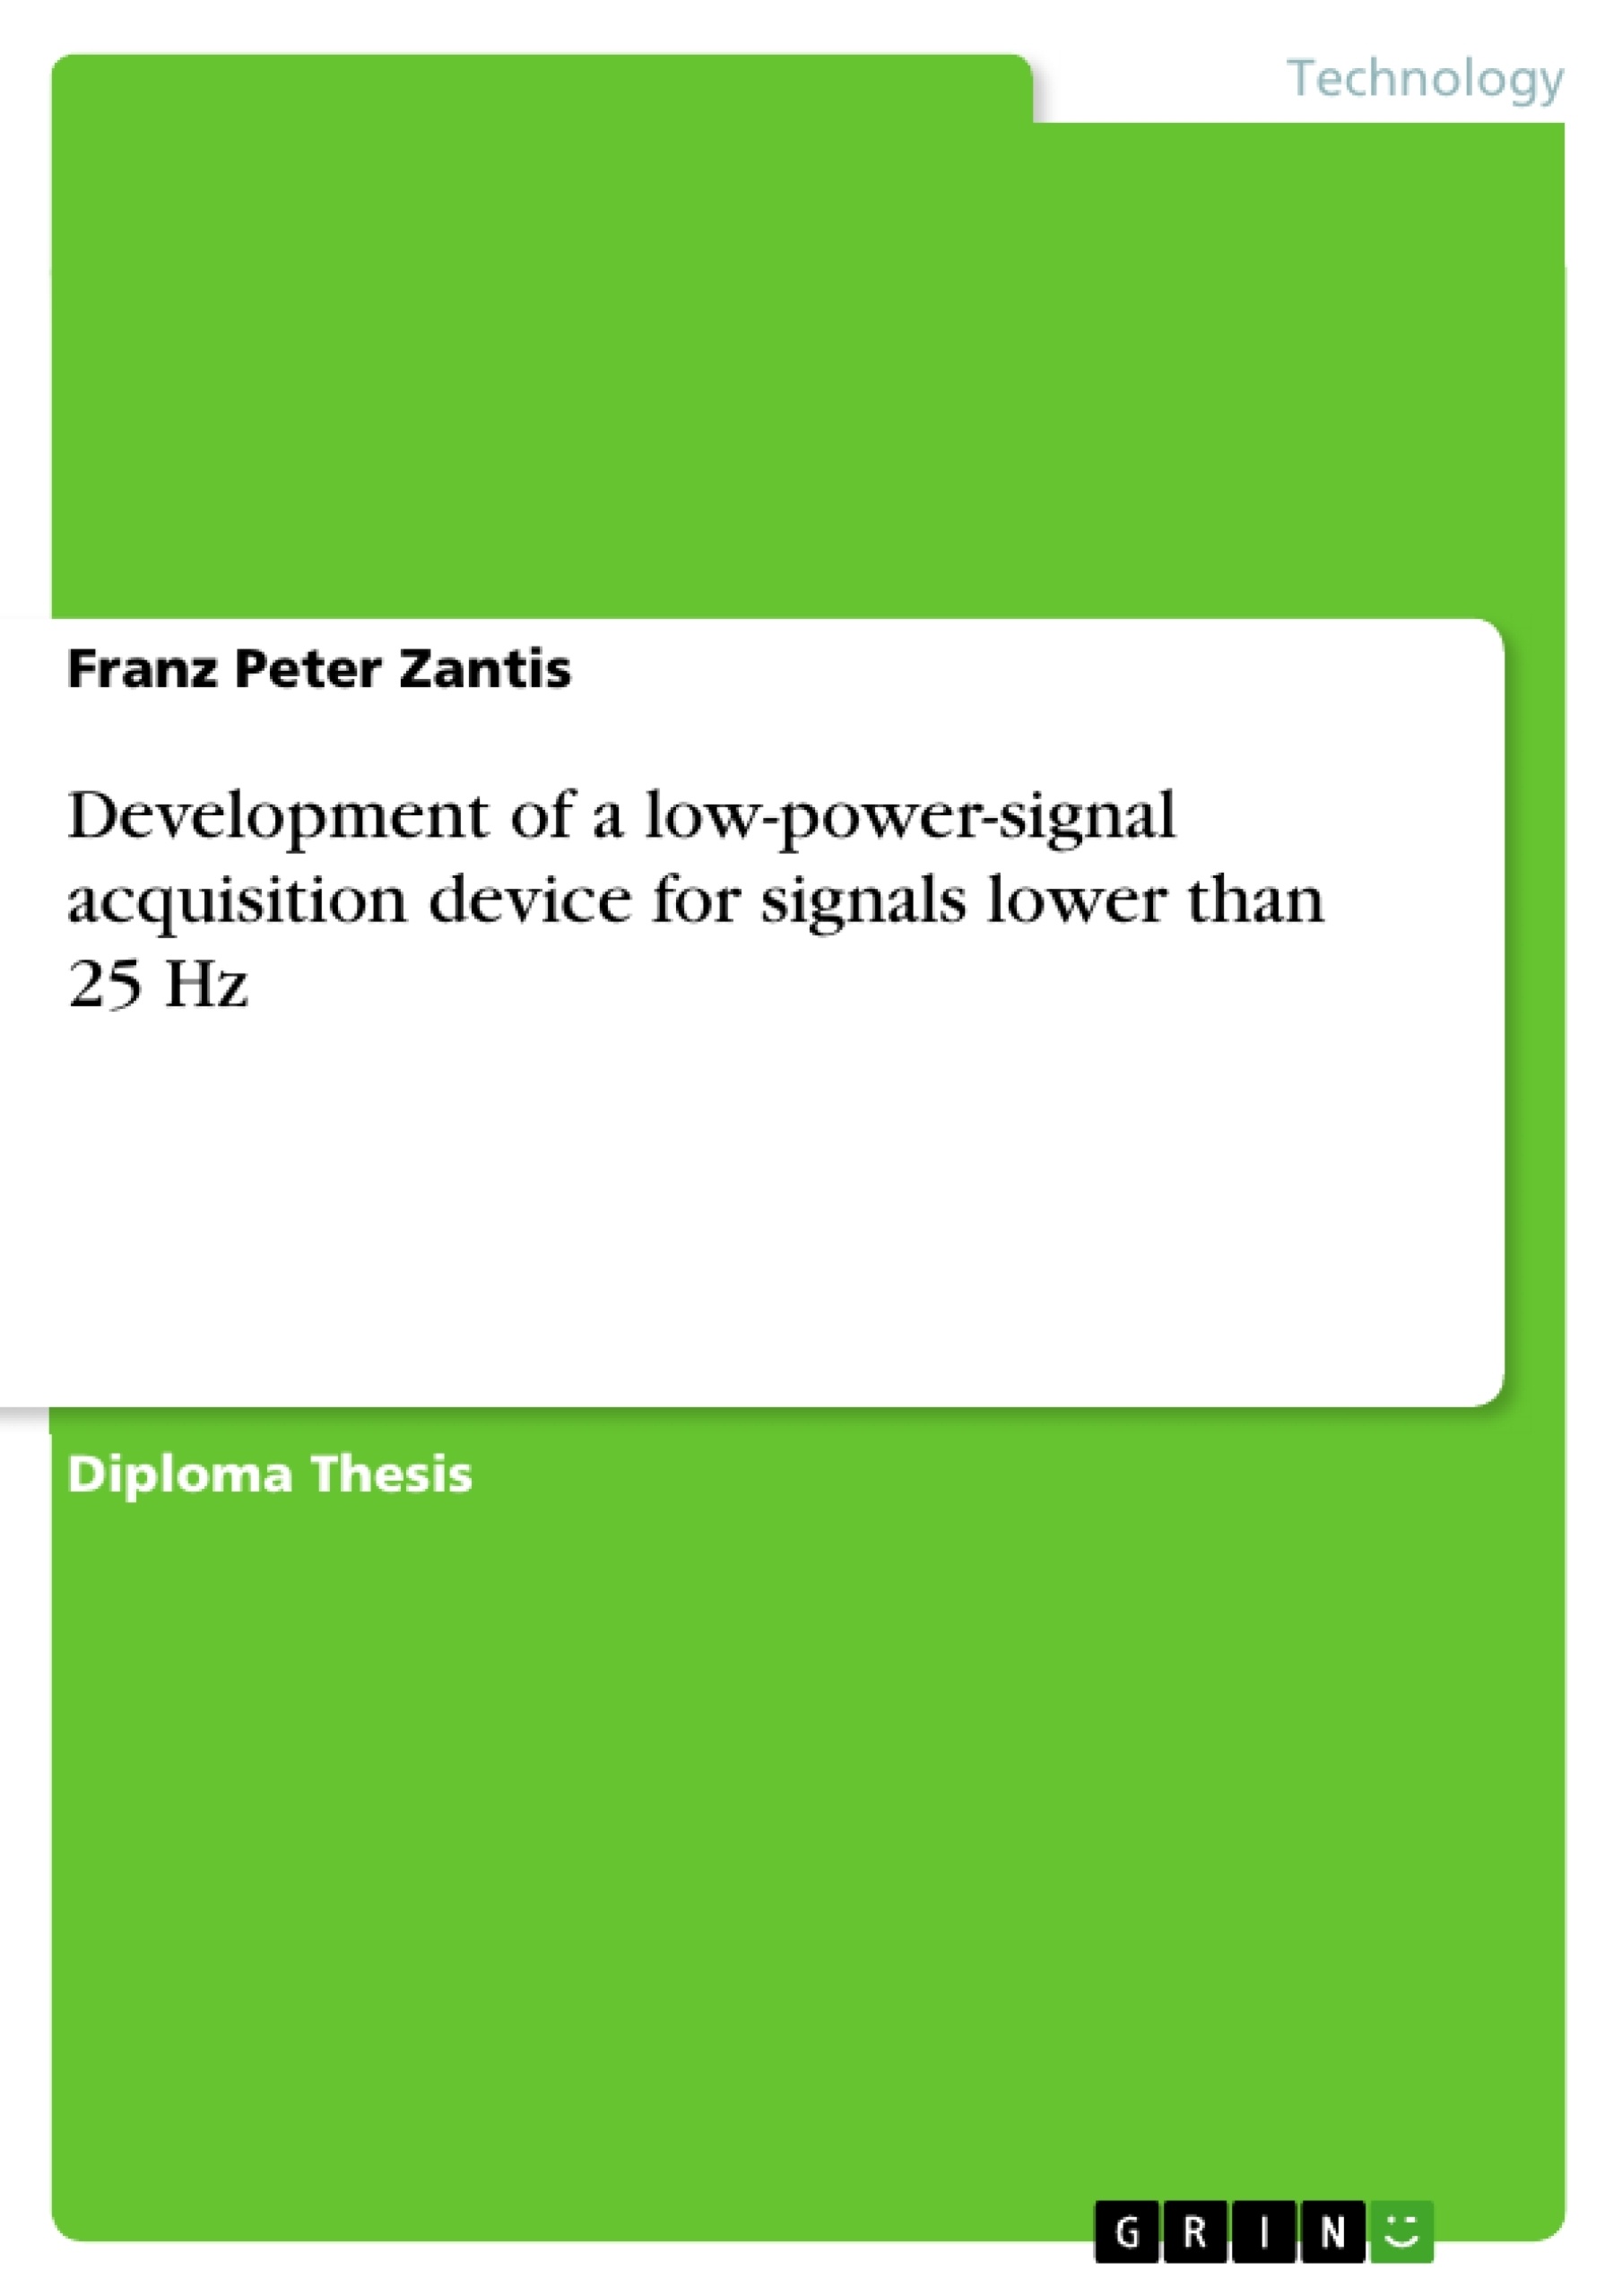 Title: Development of a low-power-signal acquisition device for signals lower than 25 Hz